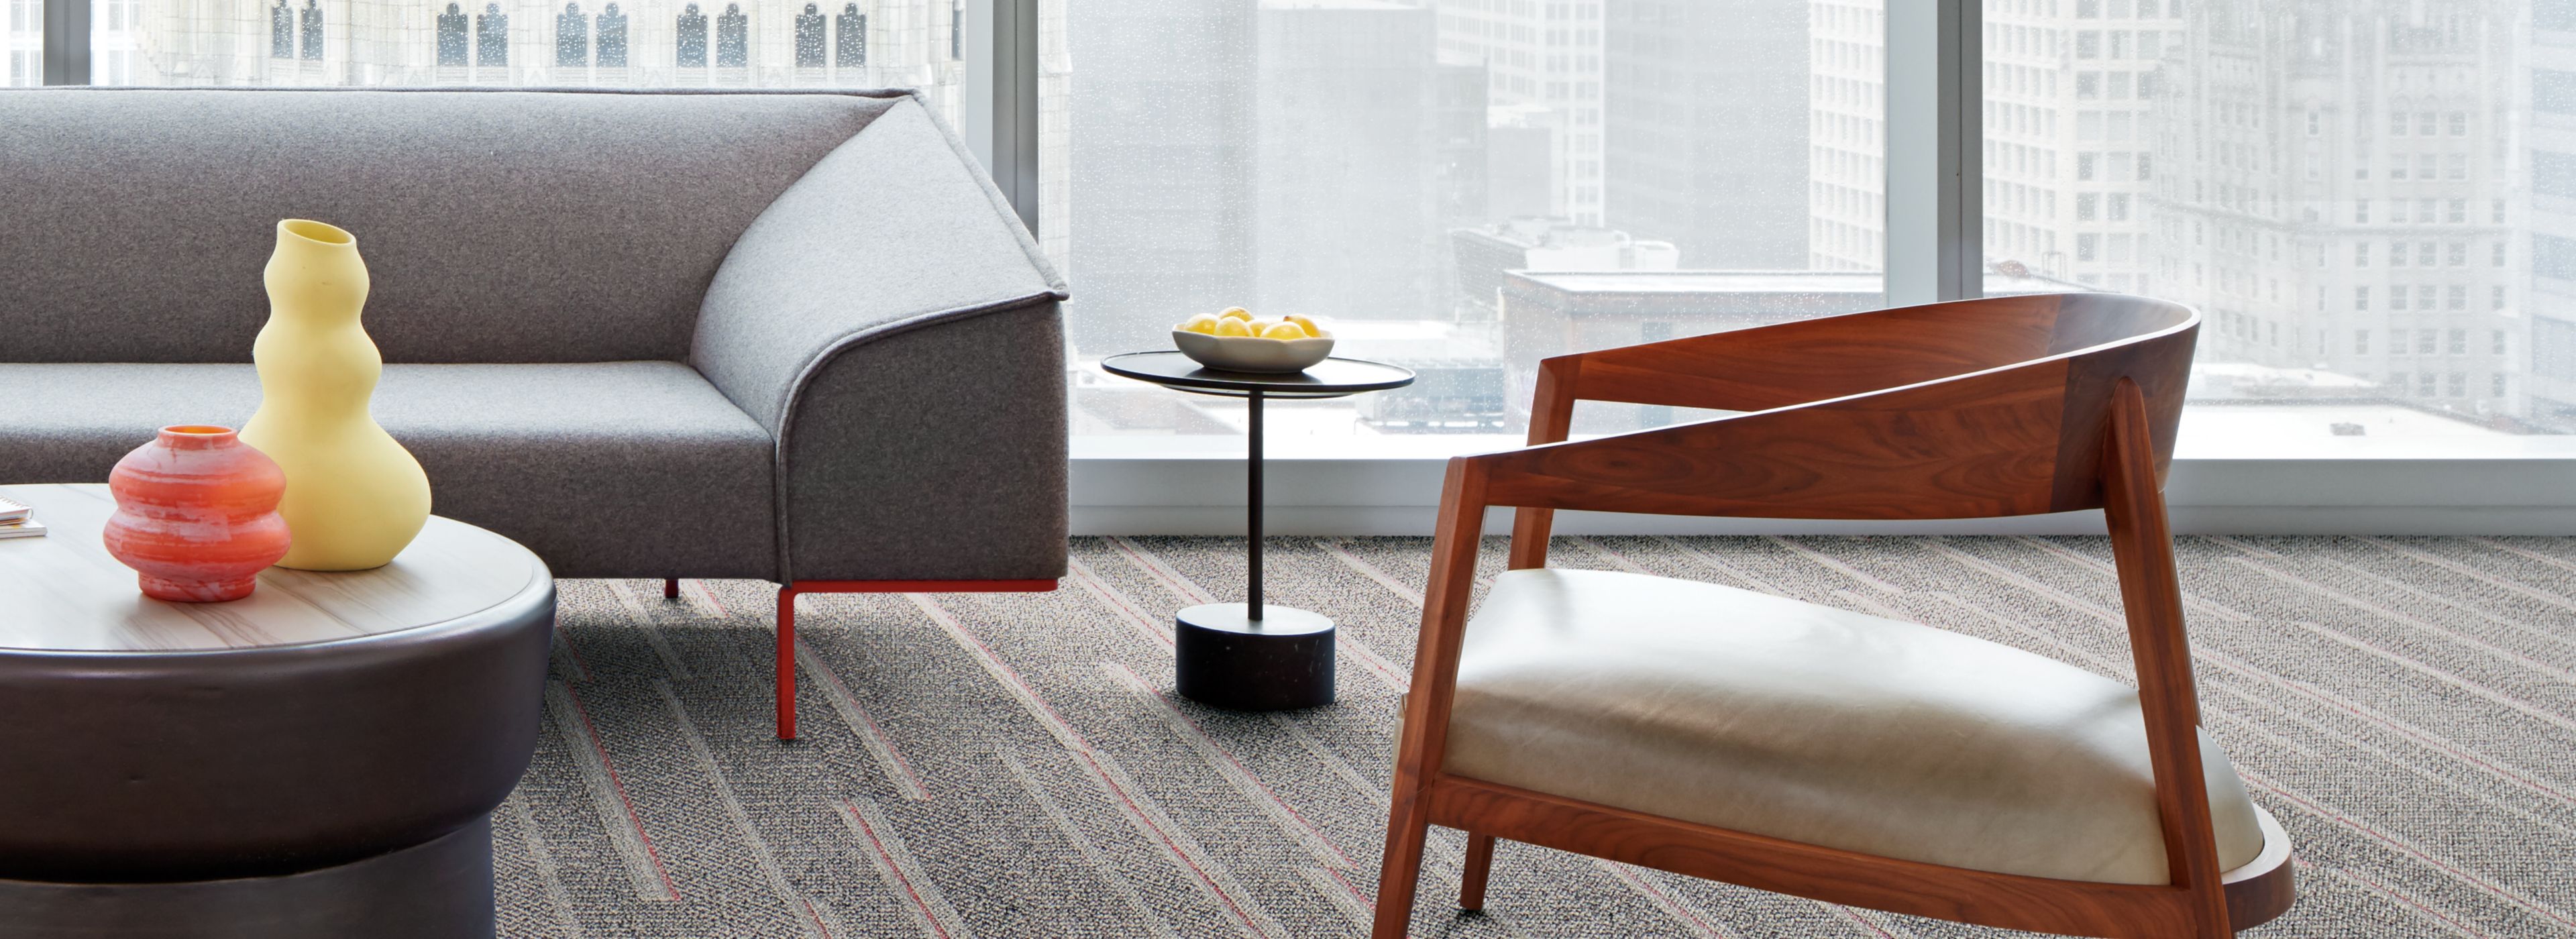 Interface Simple Sash plank carpet tile in common are with chairs número de imagen 1